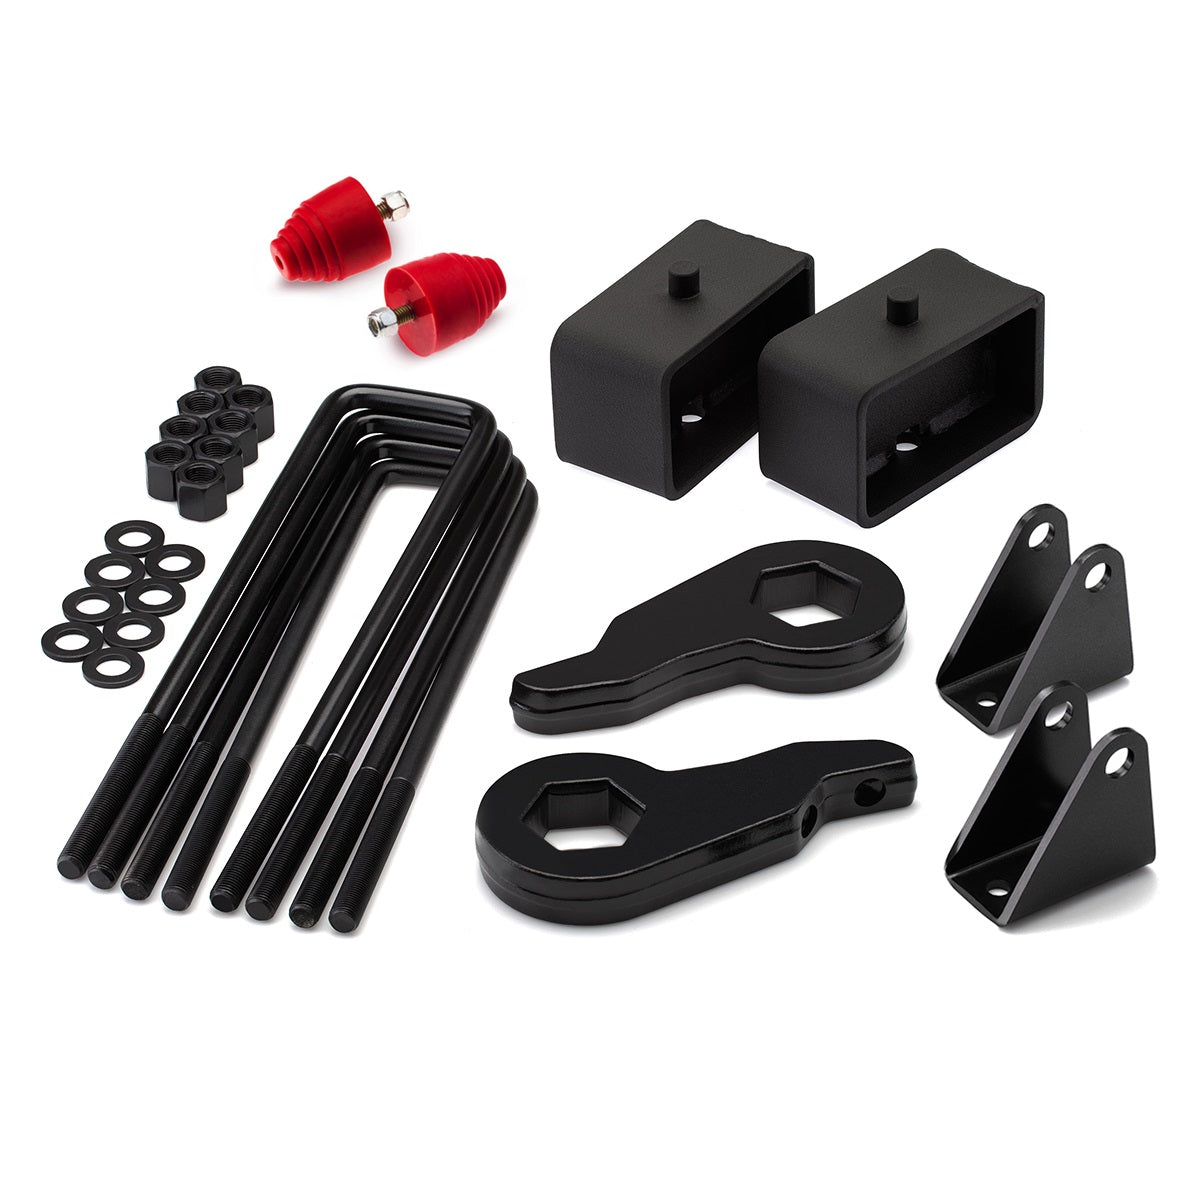 2000-2010 Chevy Silverado 3500HD Full Lift Kit with Bump Stops and Shock Extender Brackets